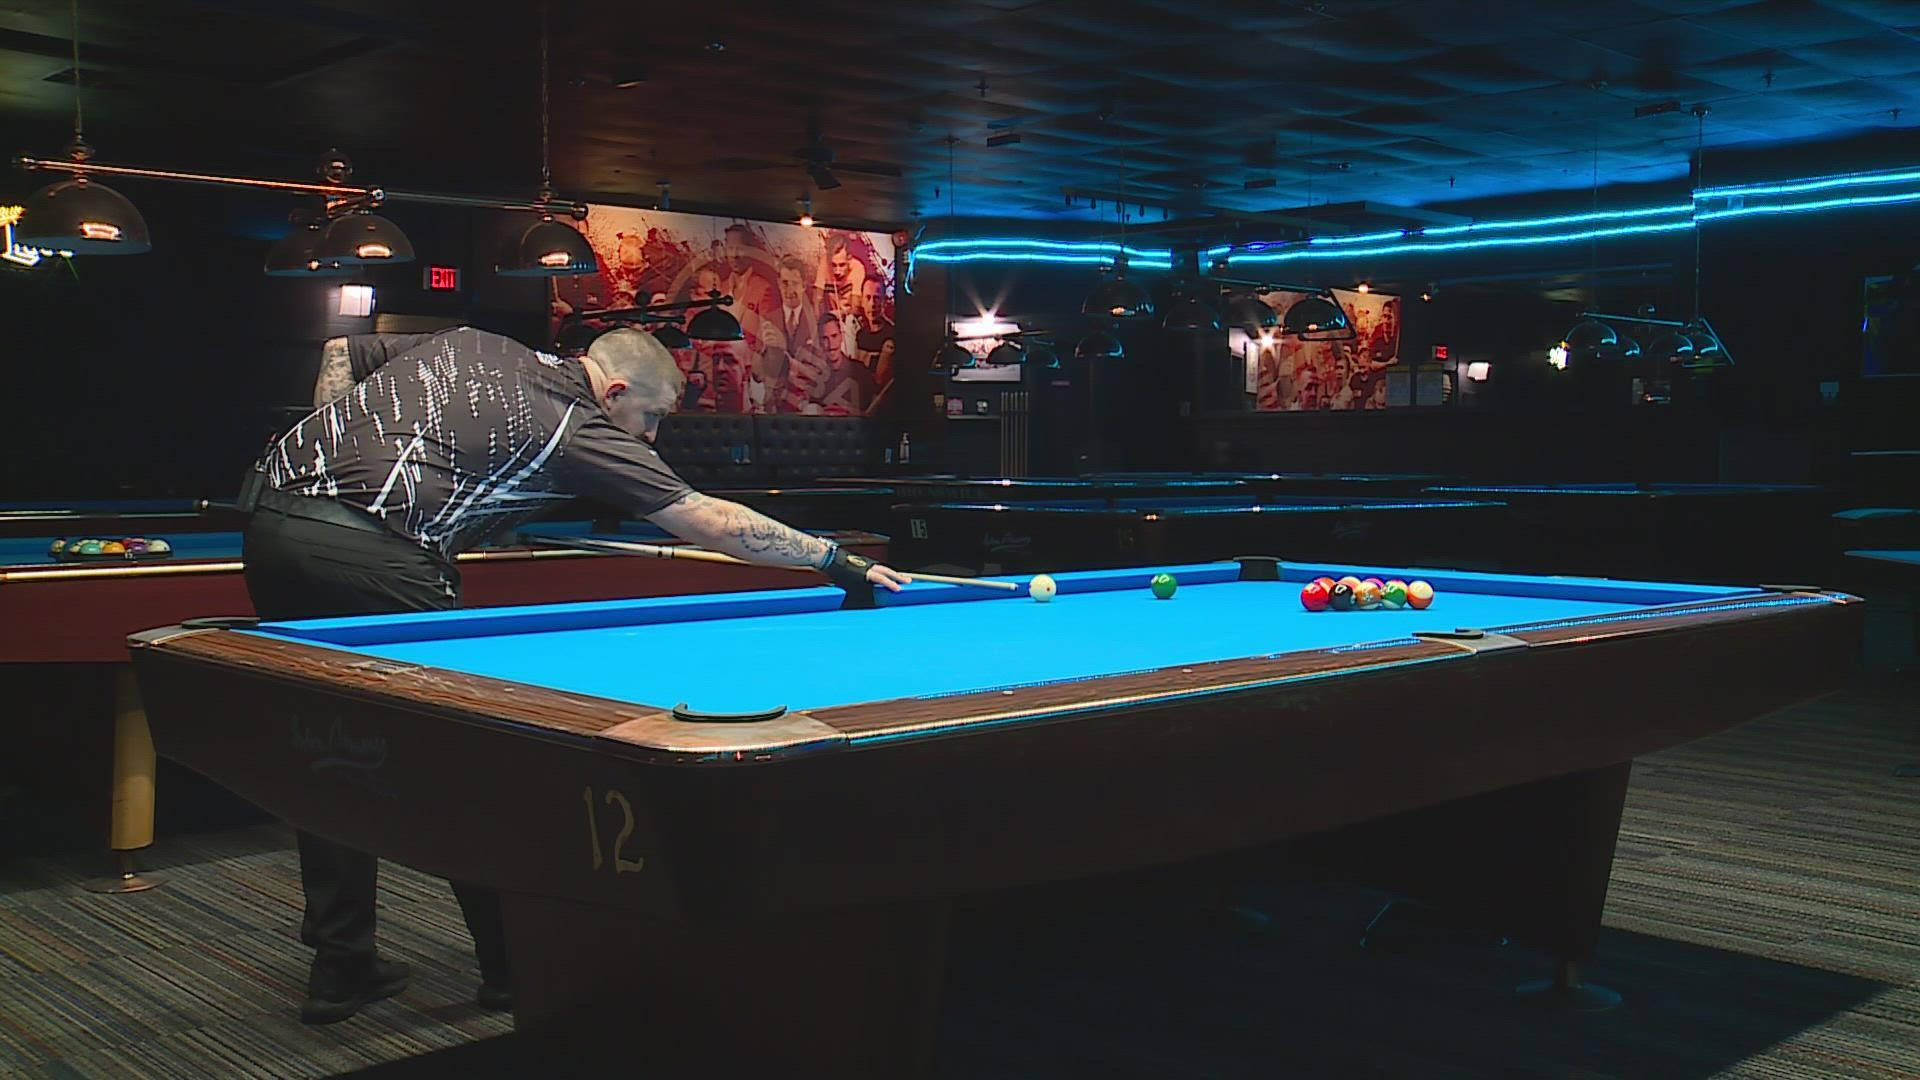 Professional billiards player in action on a vibrant blue pool table. Wallpaper